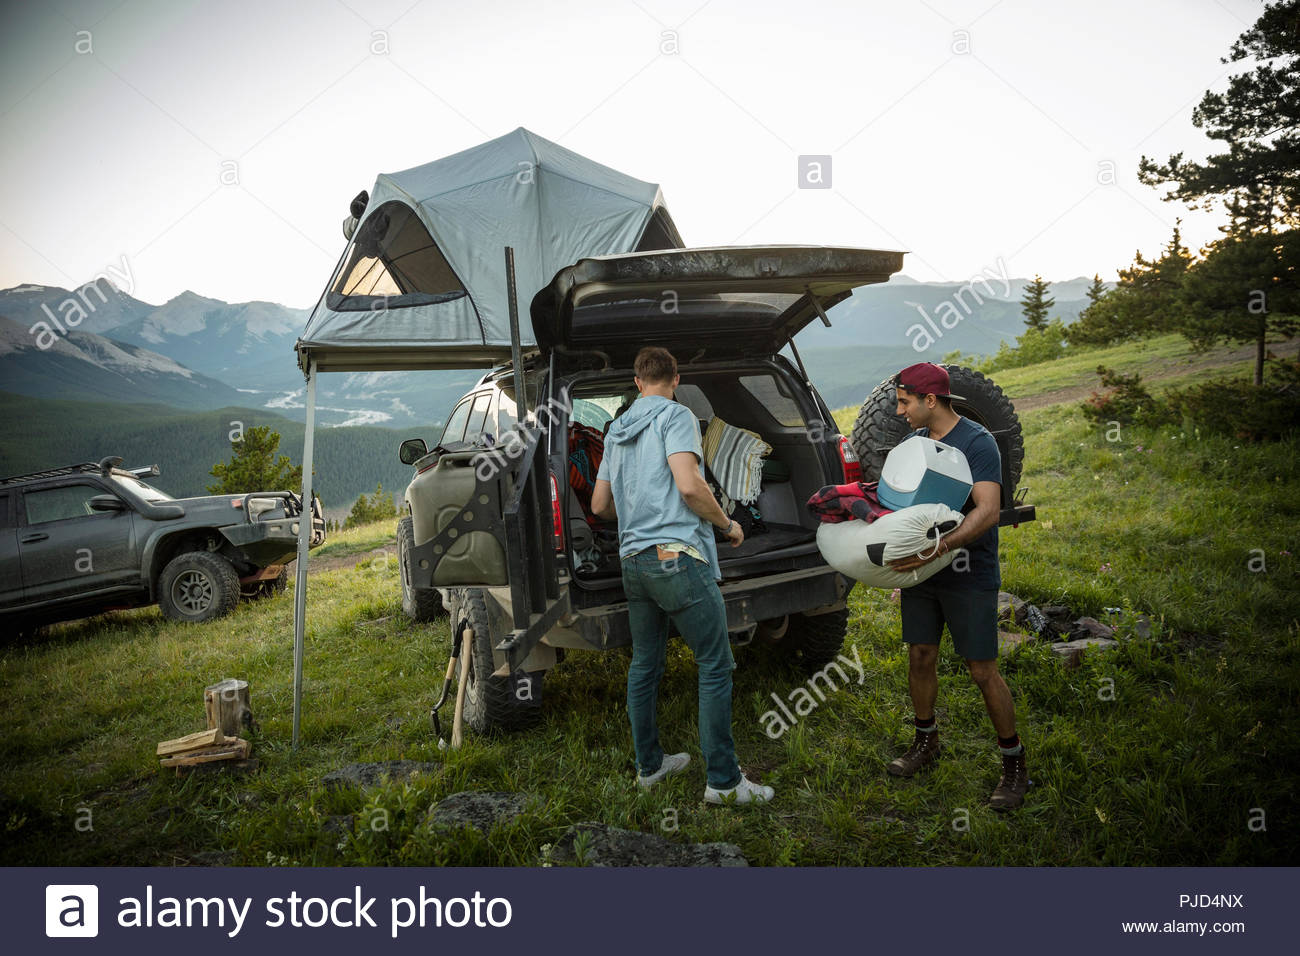 Friends camping, unloading SUV with rooftop tent in mountain field, Alberta, Canada Stock Photo